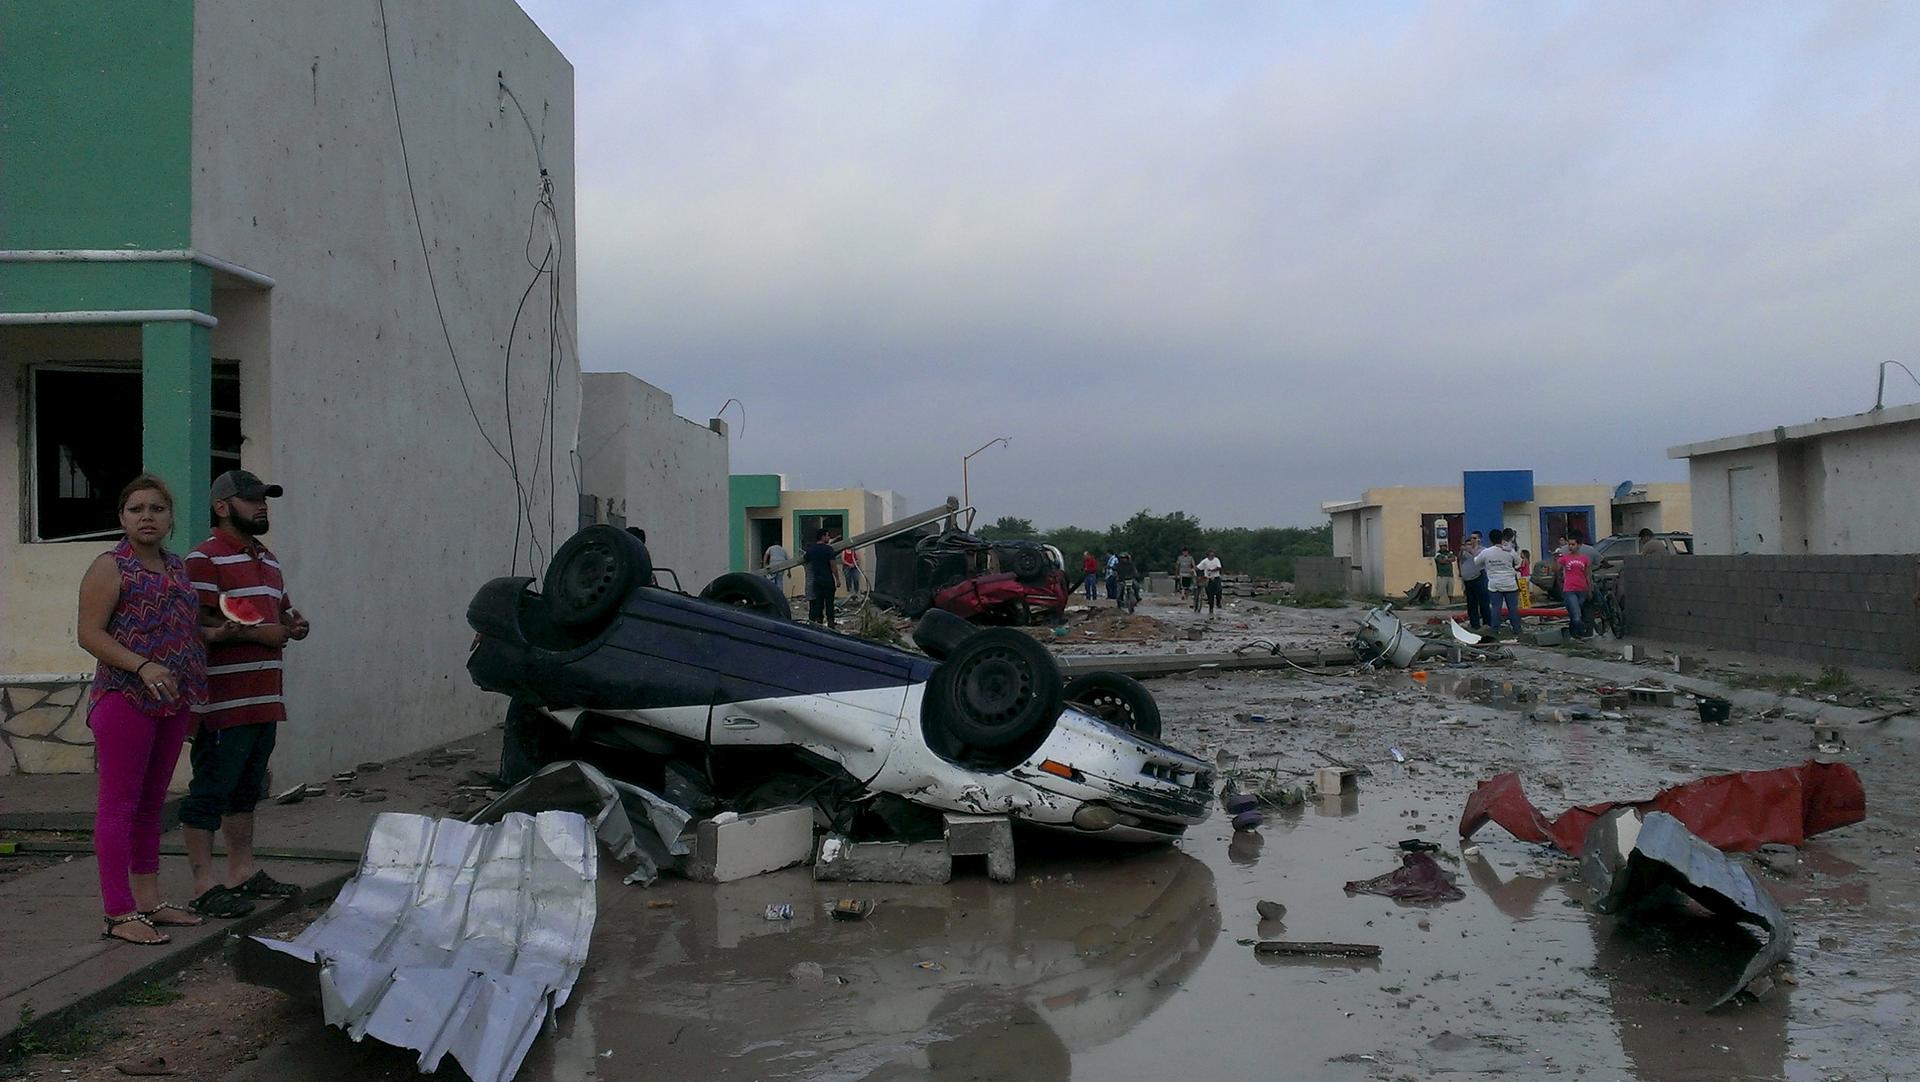 Residents stand next to a damaged car after the tornado hit Ciudad Acuña.